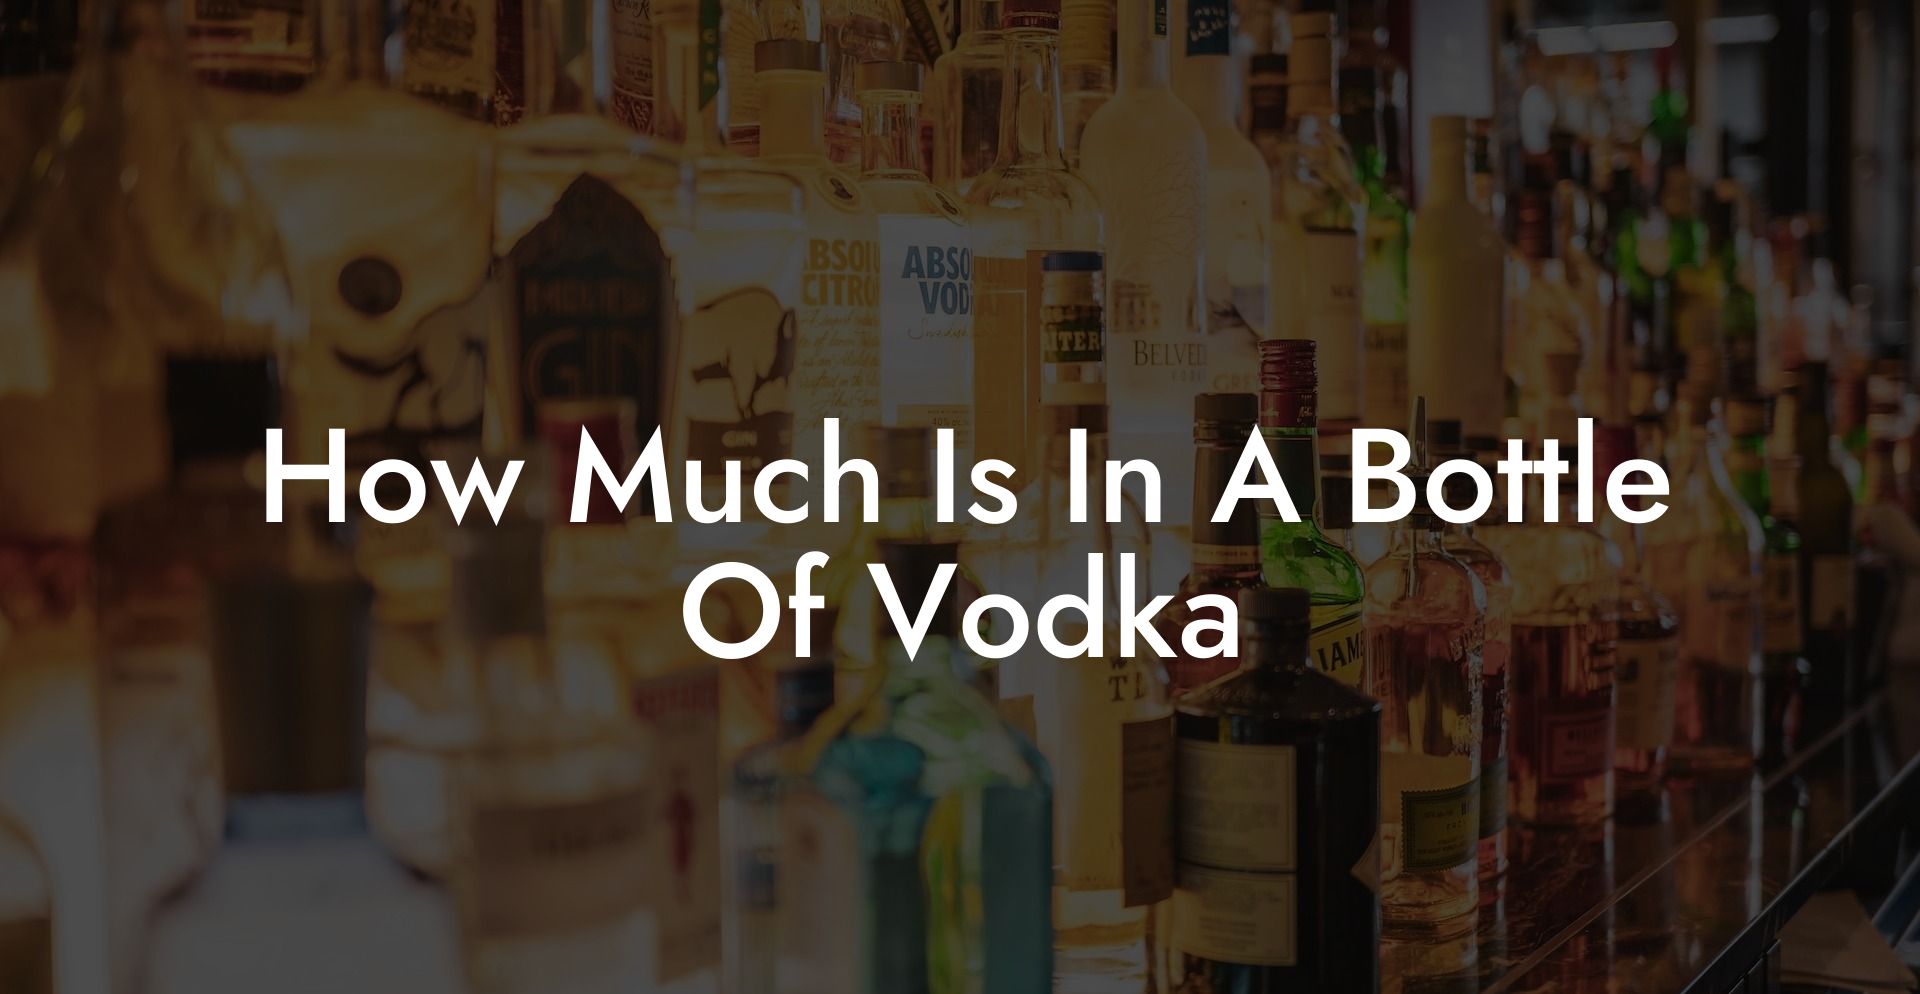 How Much Is In A Bottle Of Vodka